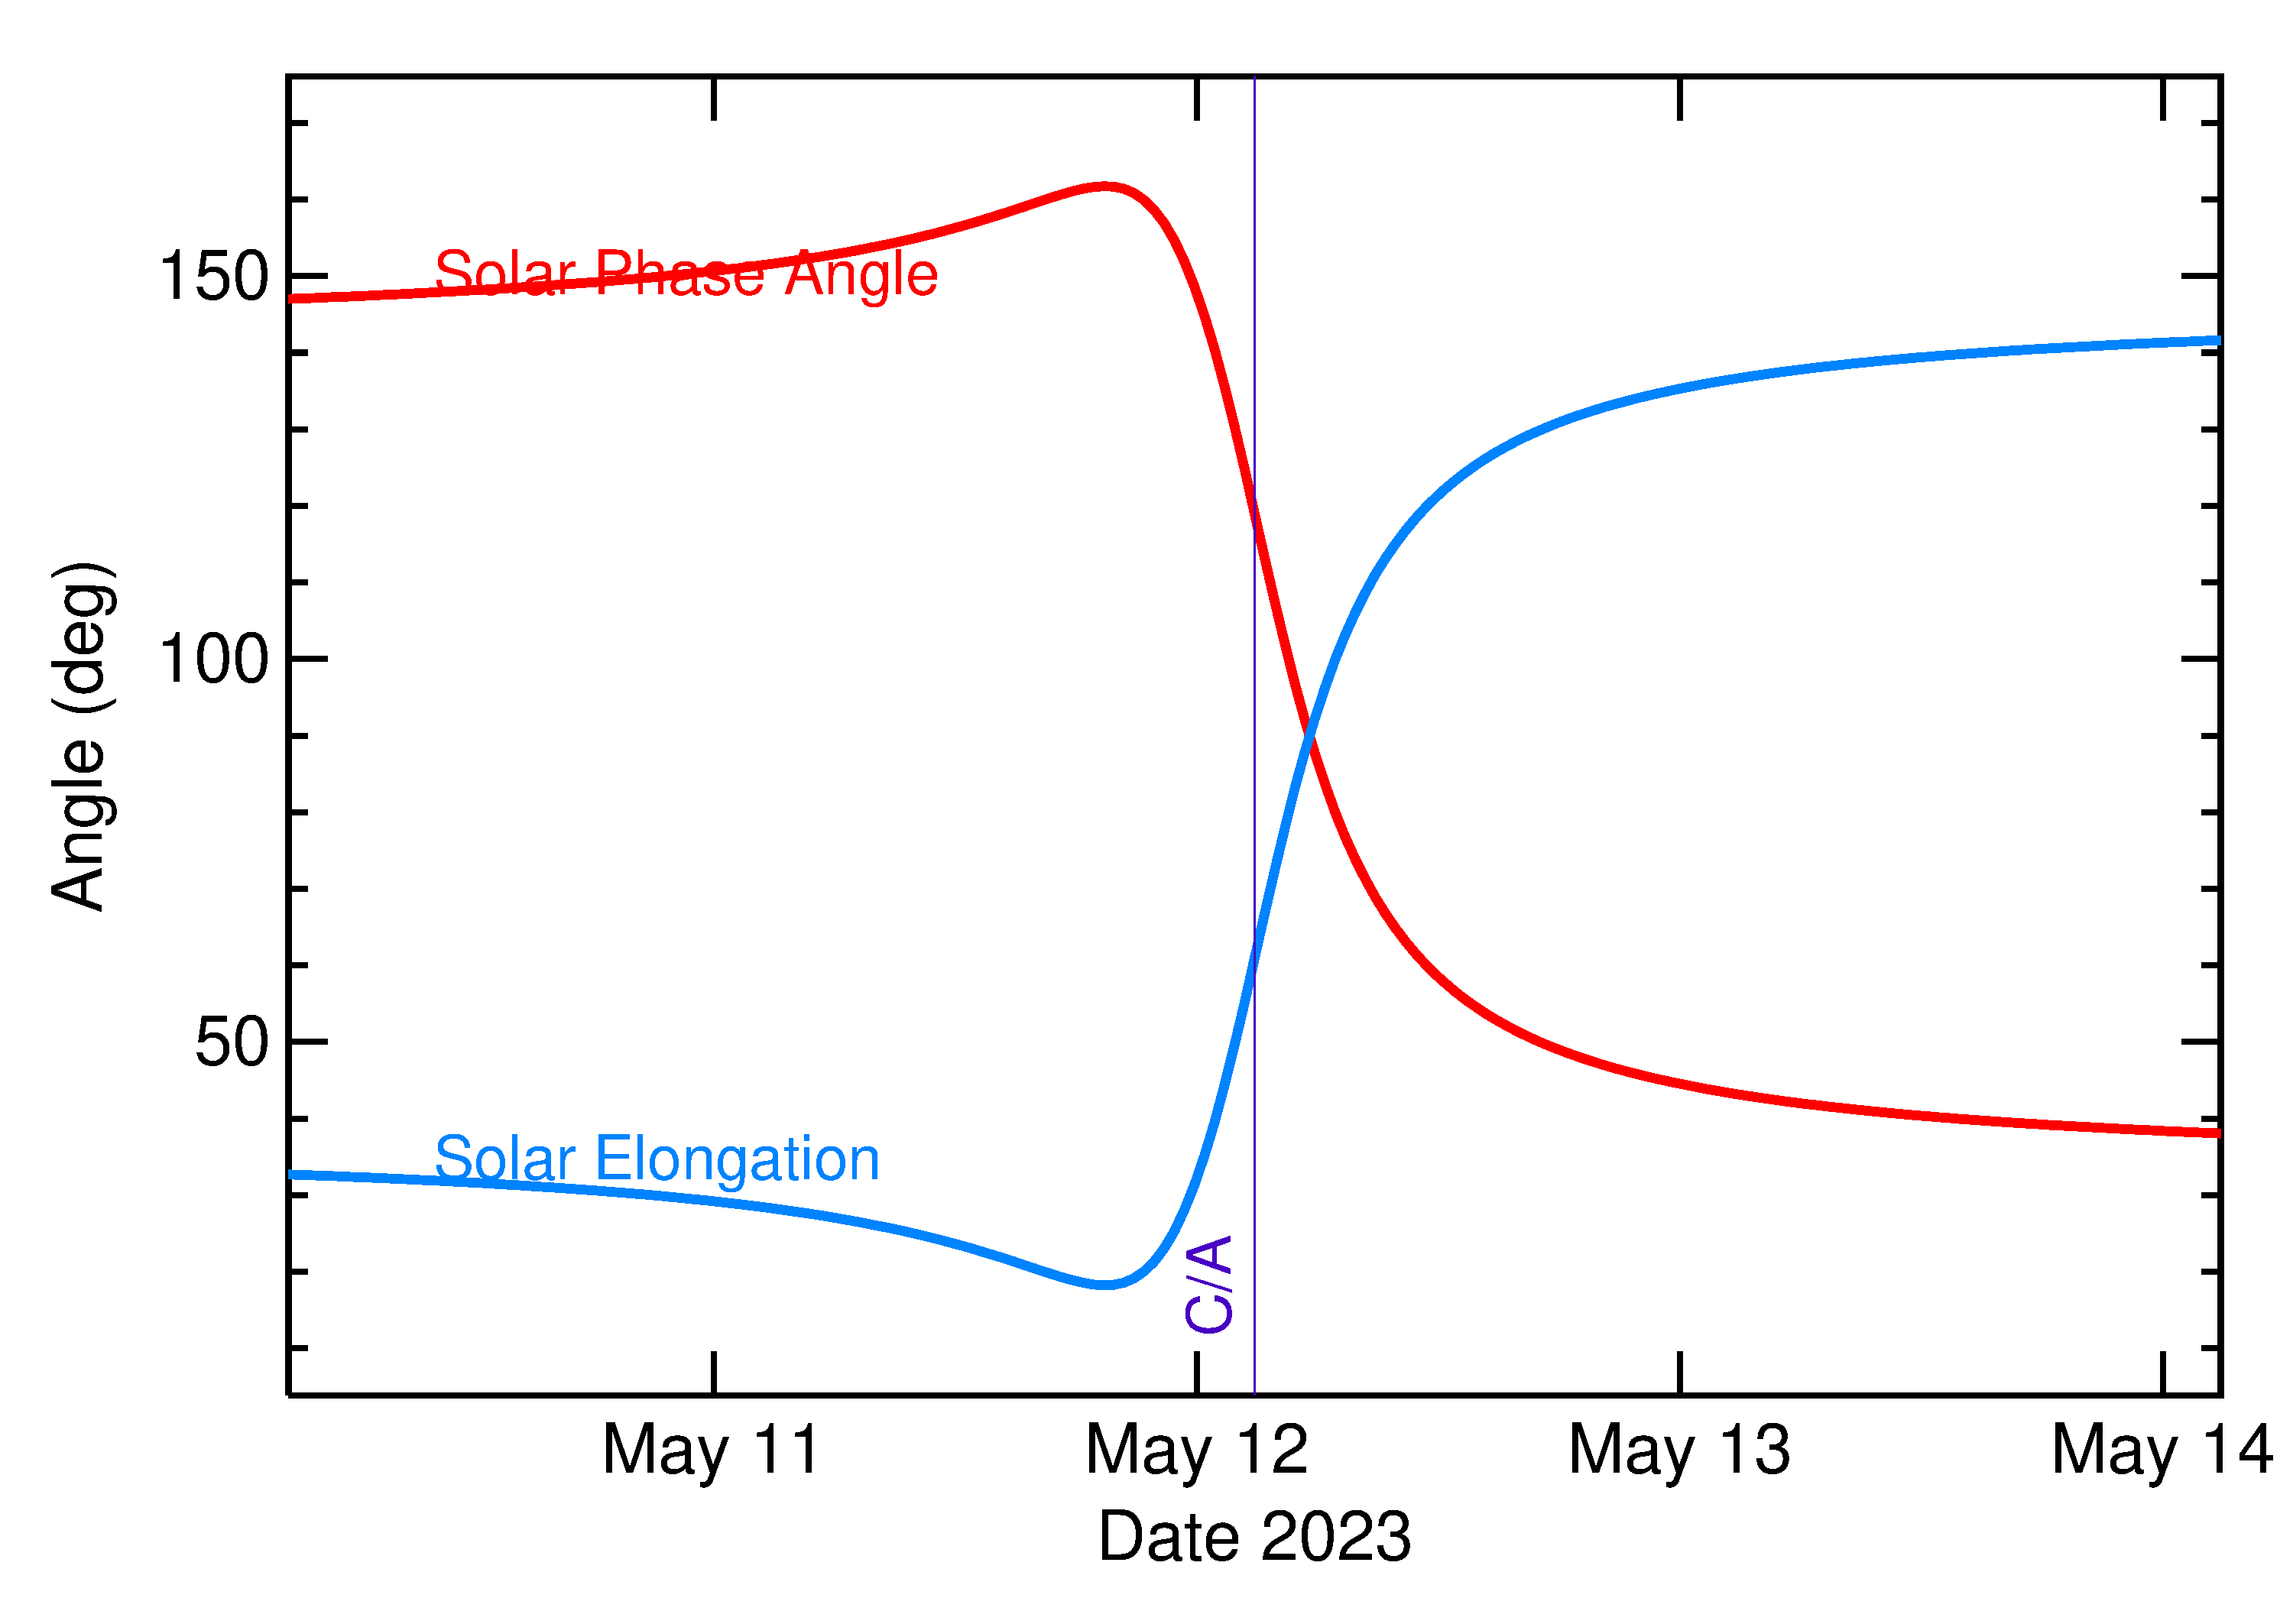 Solar Elongation and Solar Phase Angle of 2023 JA3 in the days around closest approach